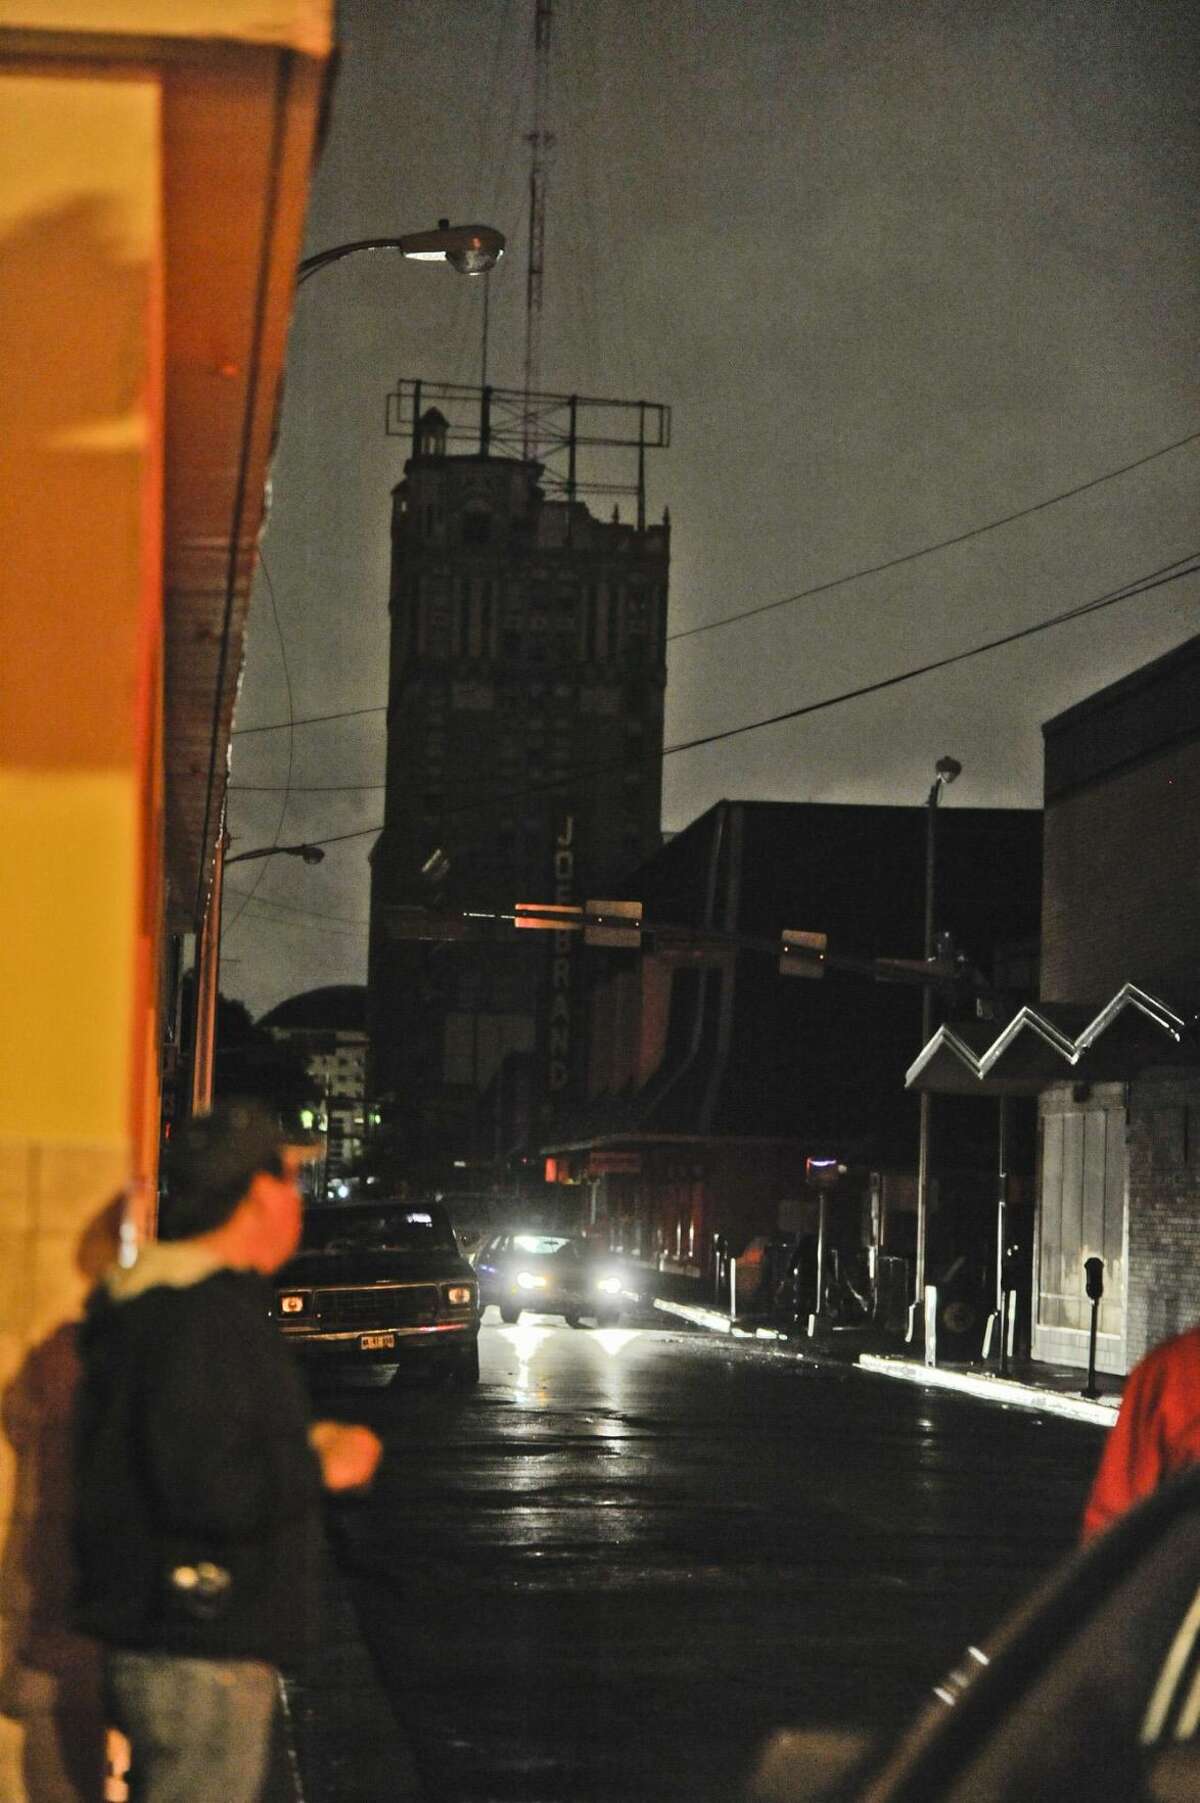 The manhole fires on Convent Avenue caused a blackout for a section of downtown Laredo on Thursday evening. READ MORE: http://bit.ly/1tiIlP0 (Photo by Danny Zaragoza/Laredo Morning Times)